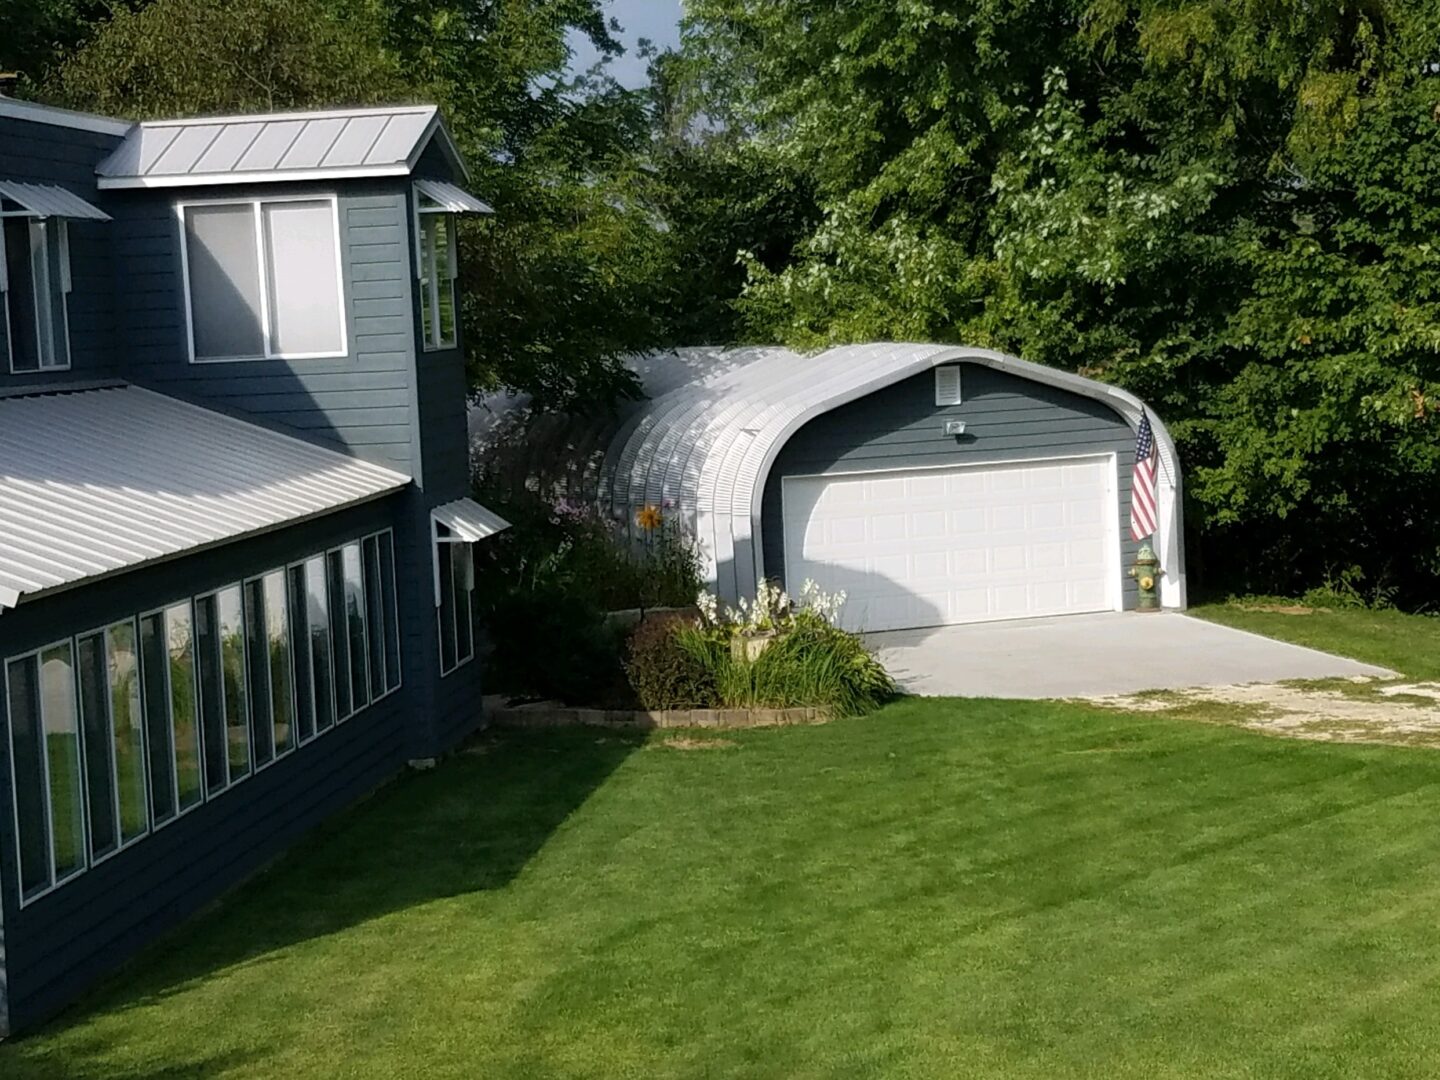 quonset hut with gray siding and large white garage door with American flag